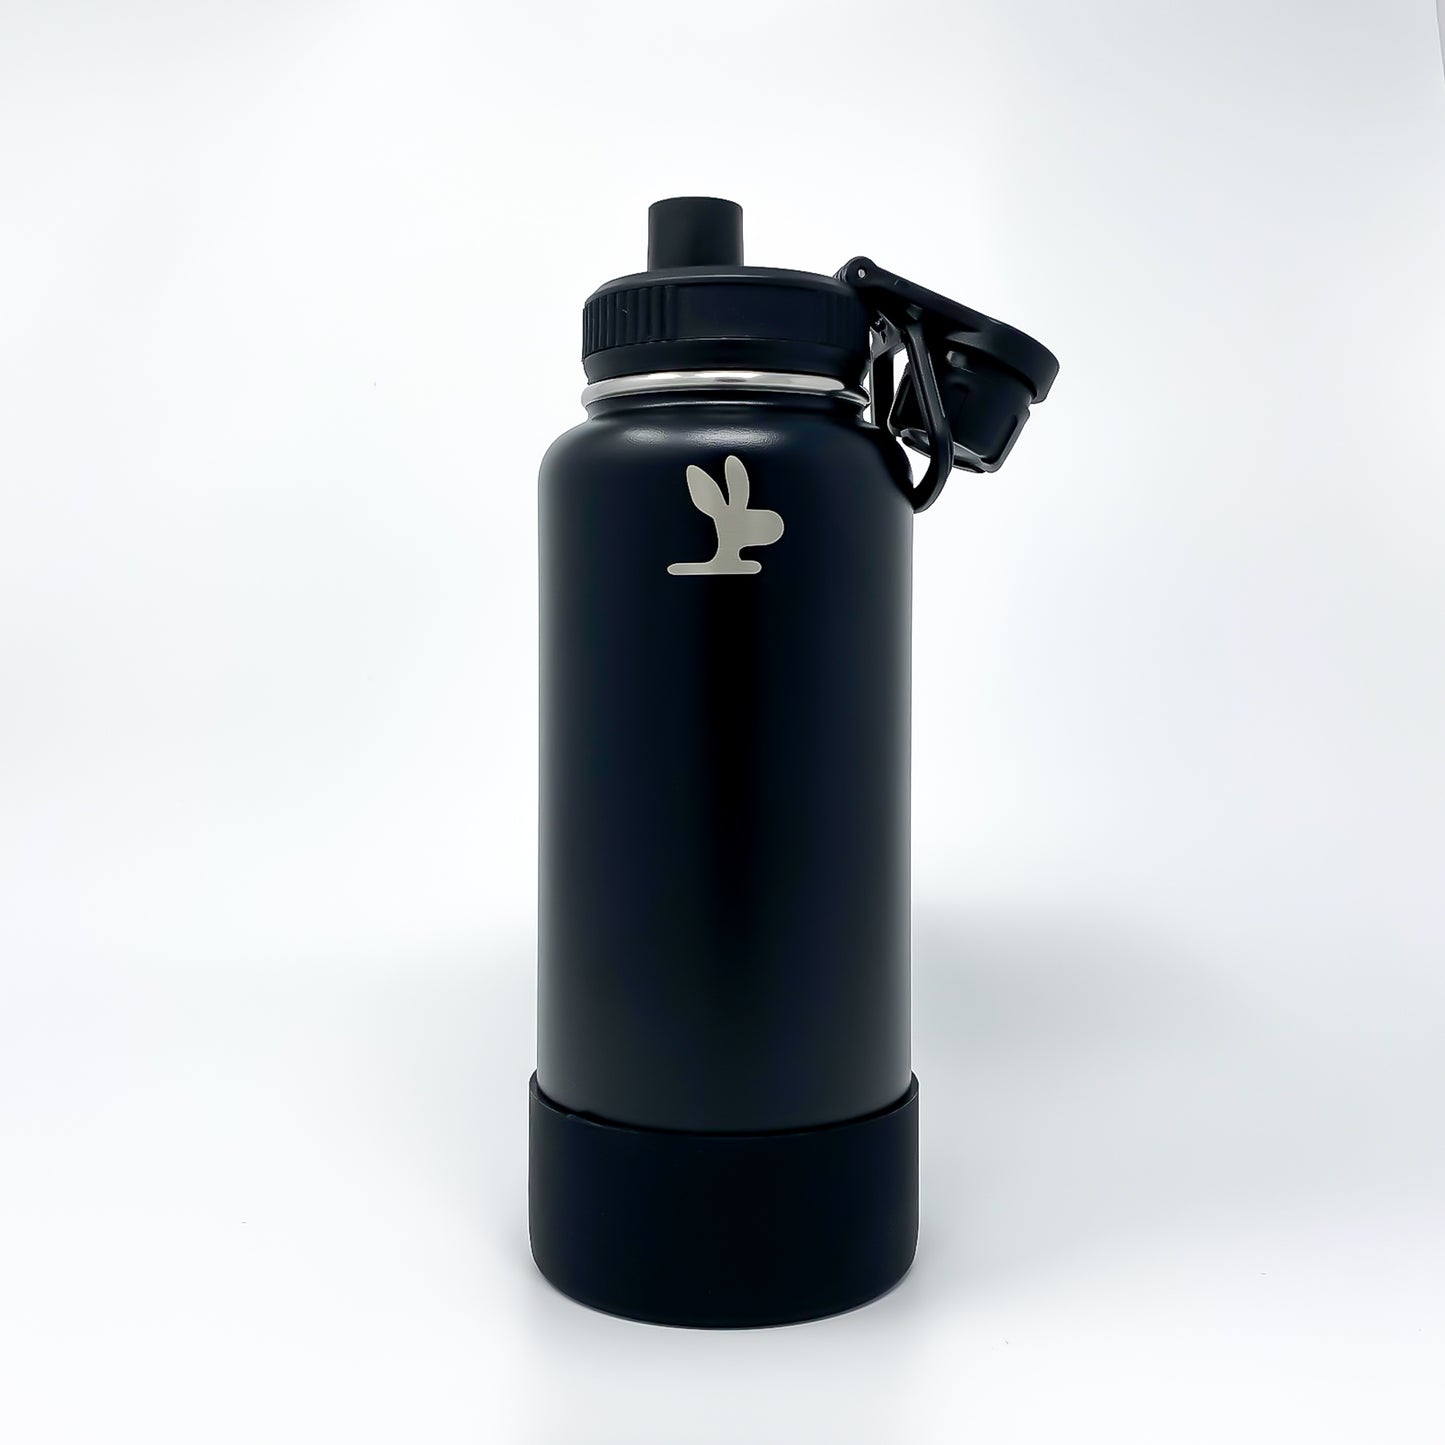 Black gym bottle with an opened chug spout on a white background